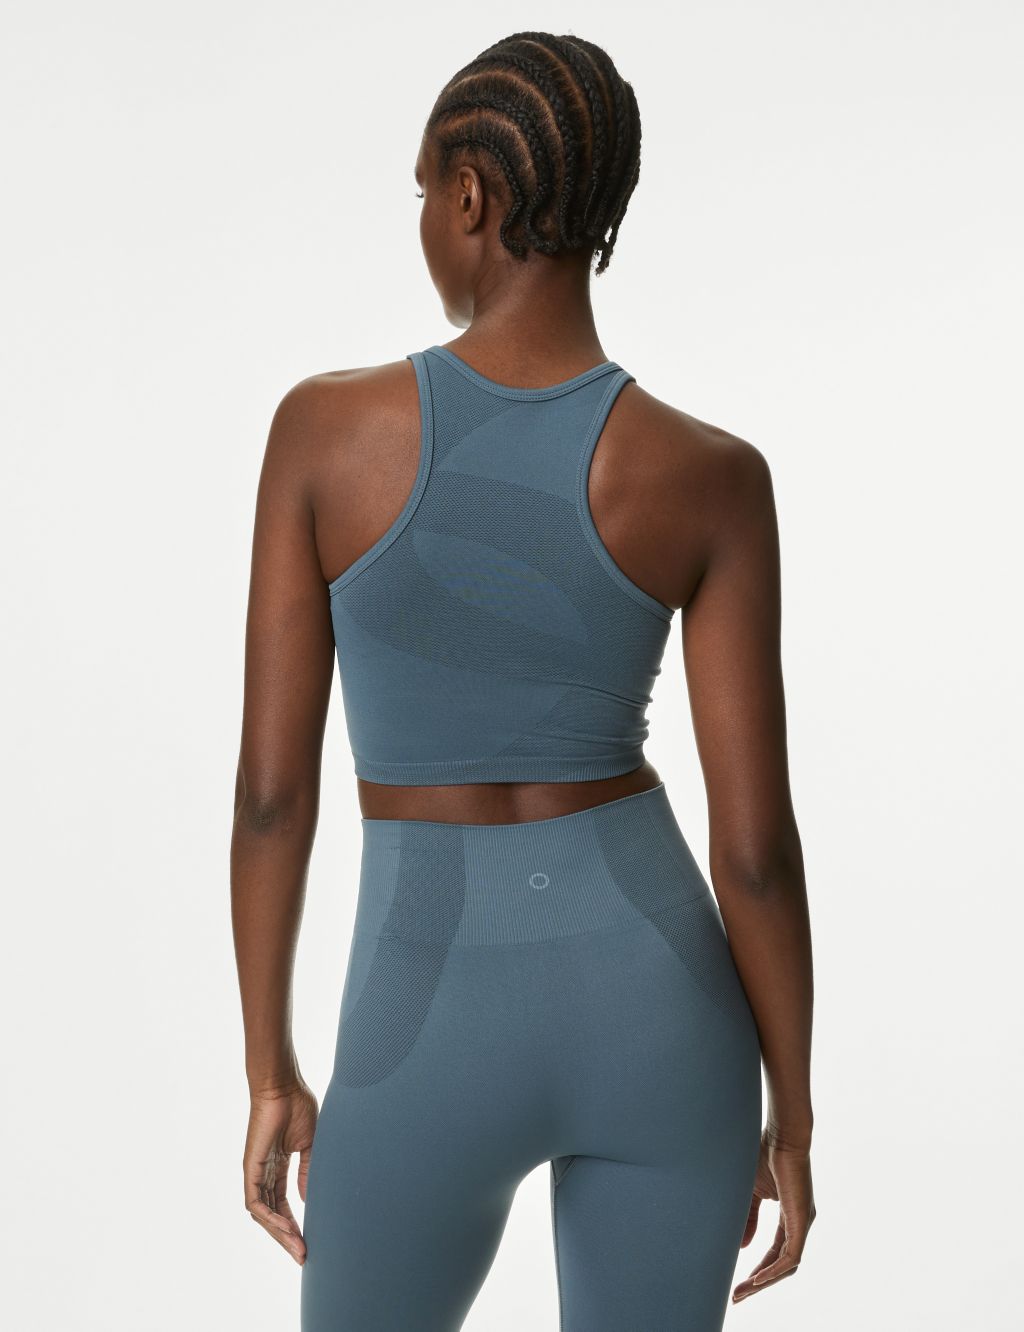 Scoop Neck Seamless Fitted Crop Top image 5